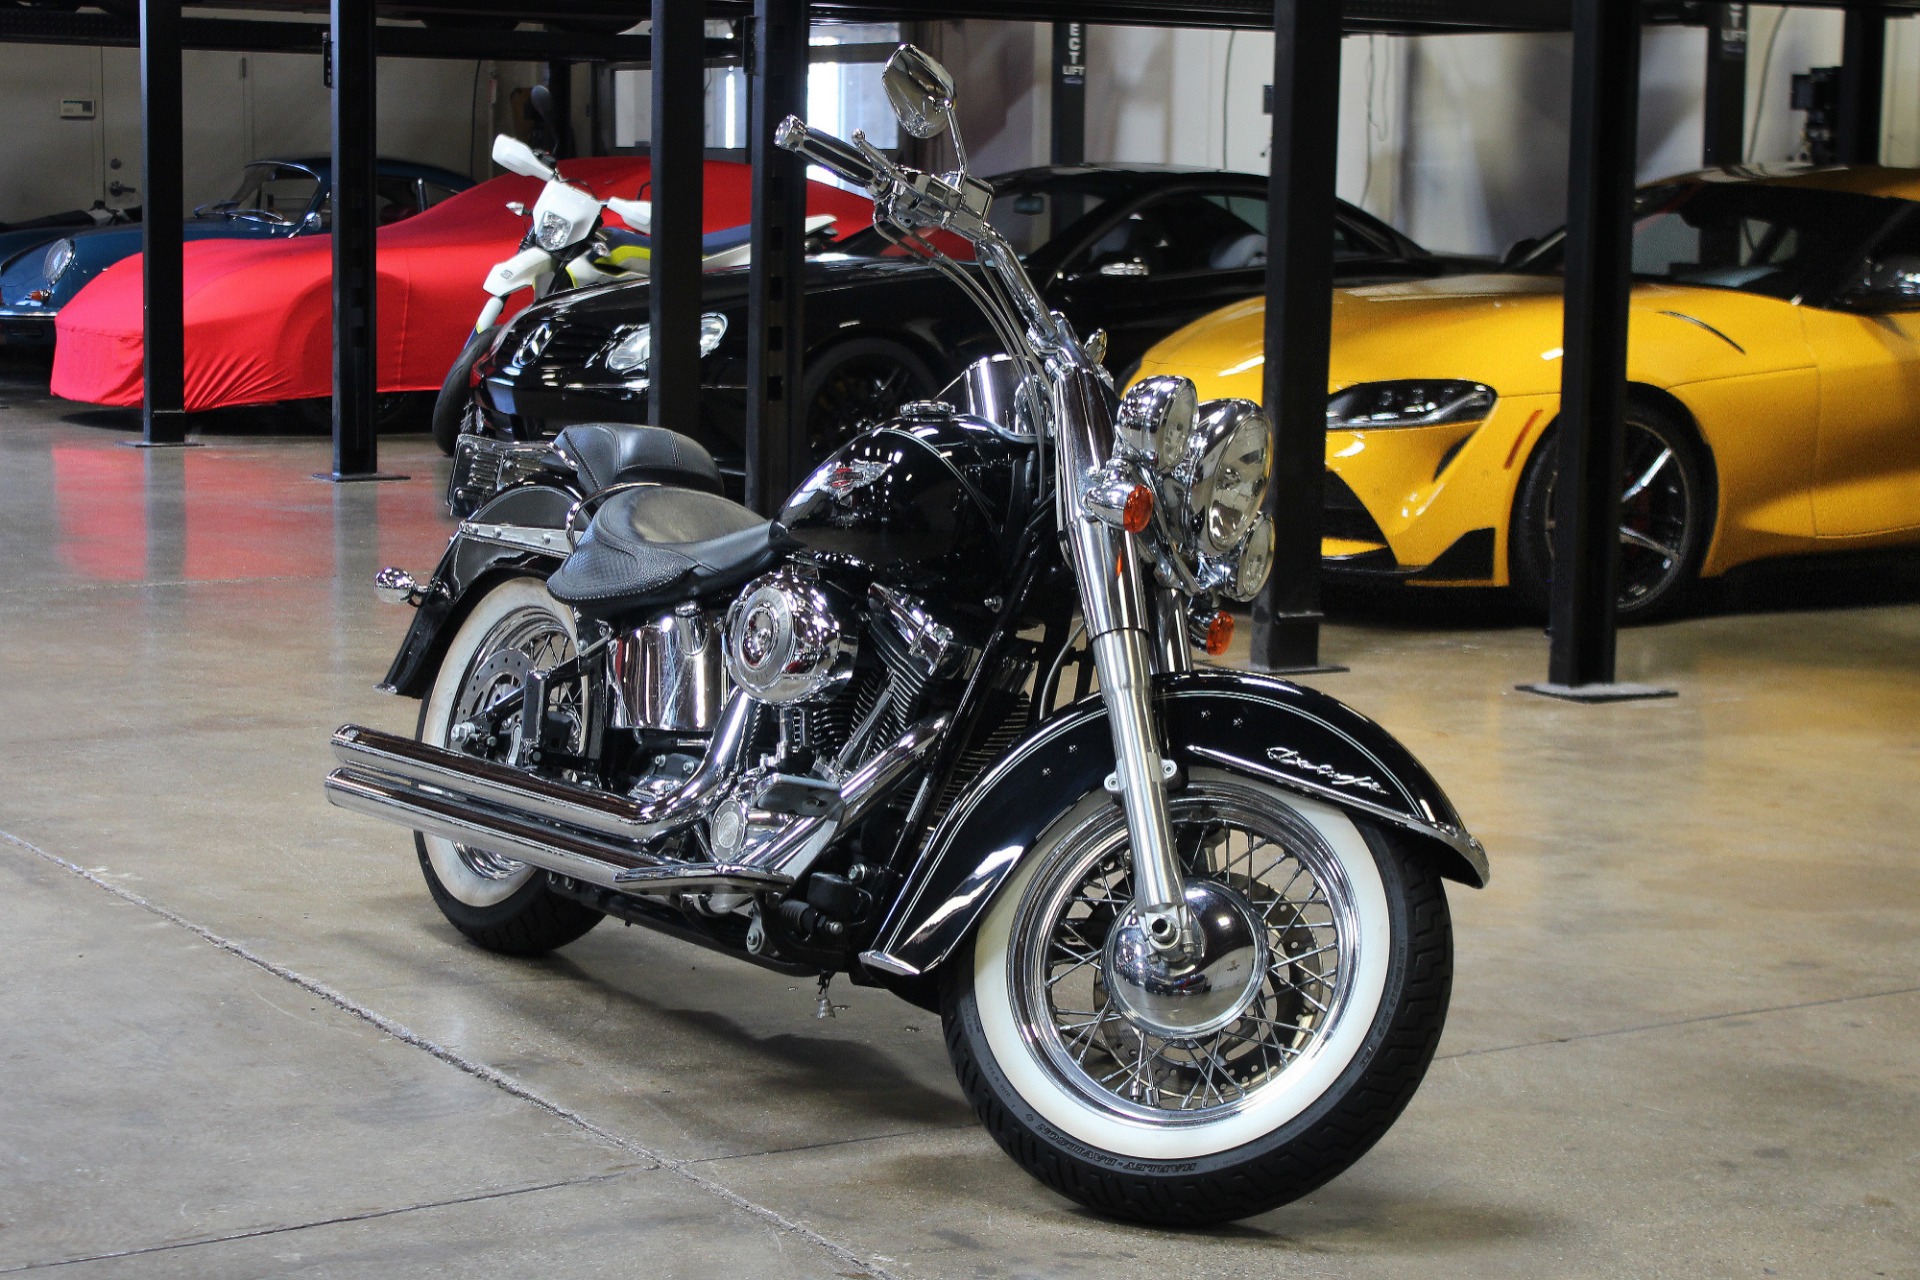 Used 2007 Harley Davidson Softtail Deluxe FLSTNI for sale Sold at San Francisco Sports Cars in San Carlos CA 94070 1